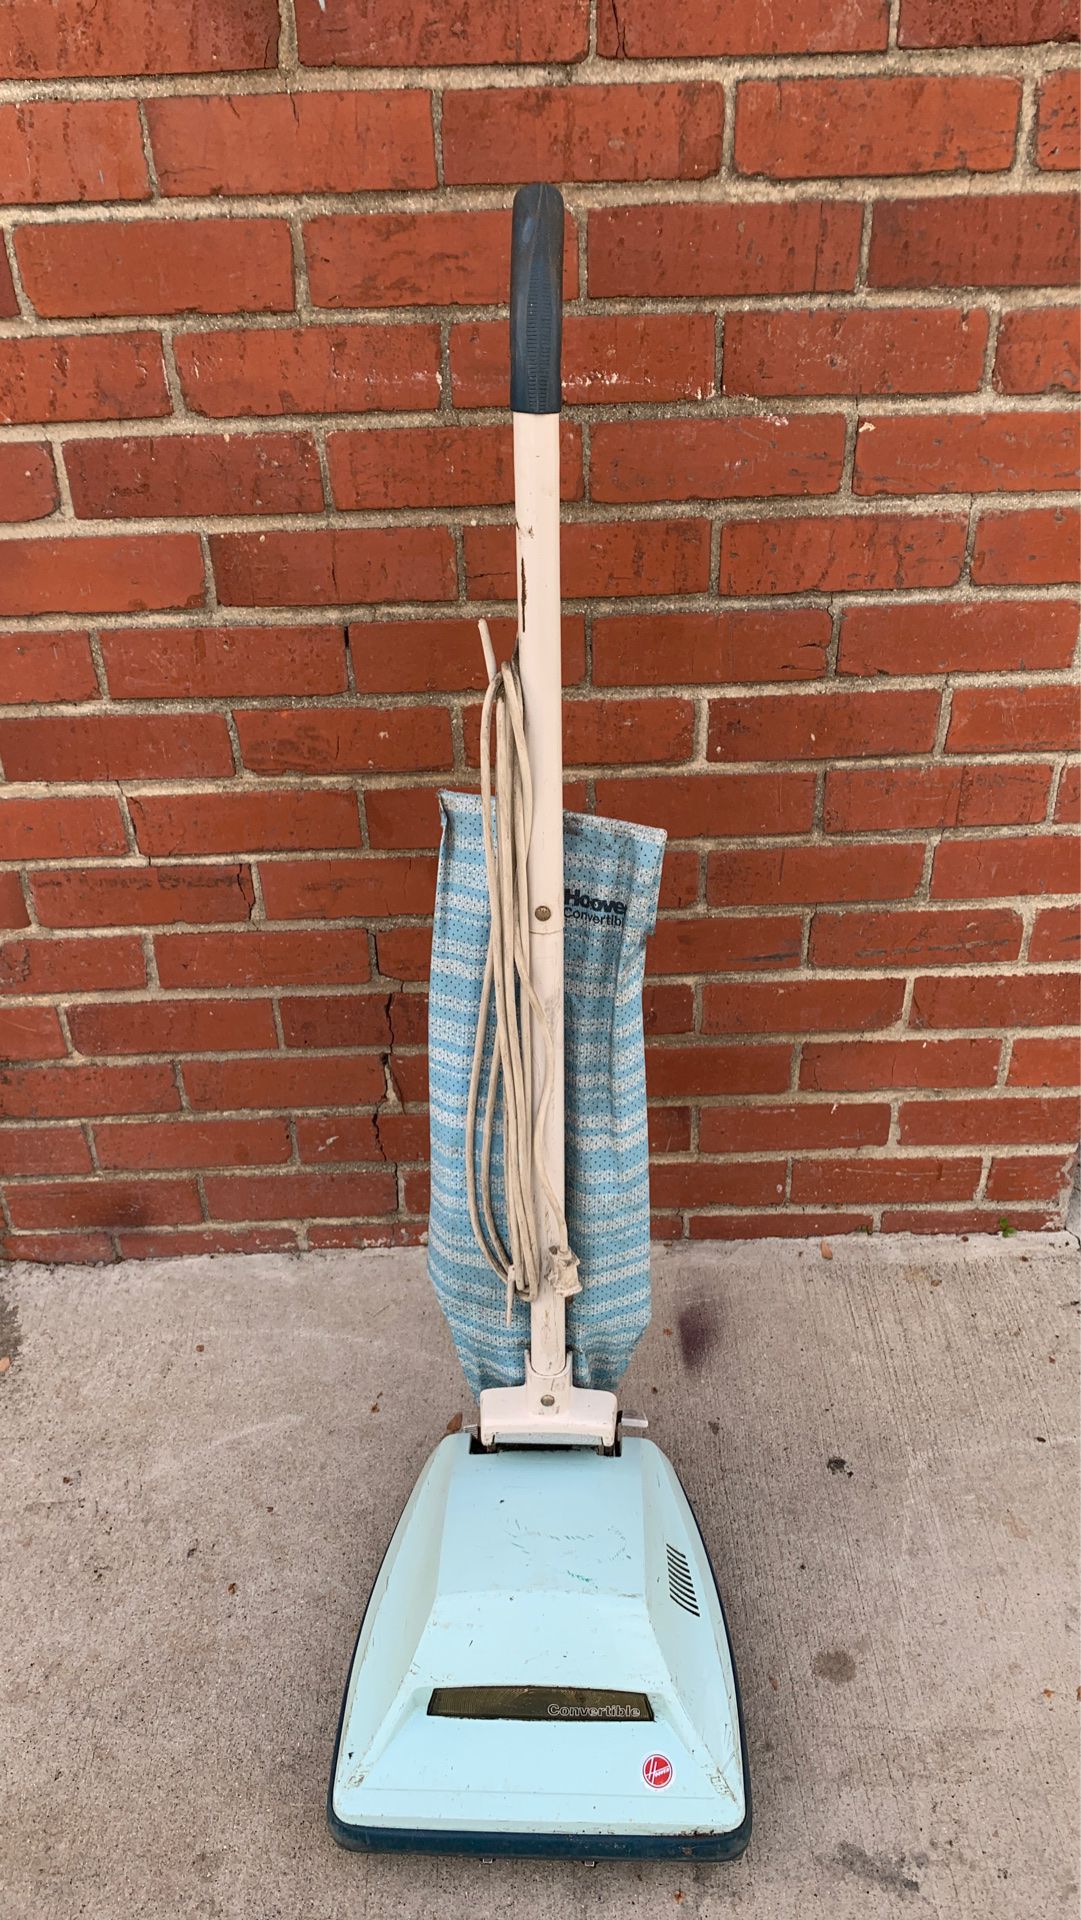 Hoover Convertible Commercial Vacuum Cleaner